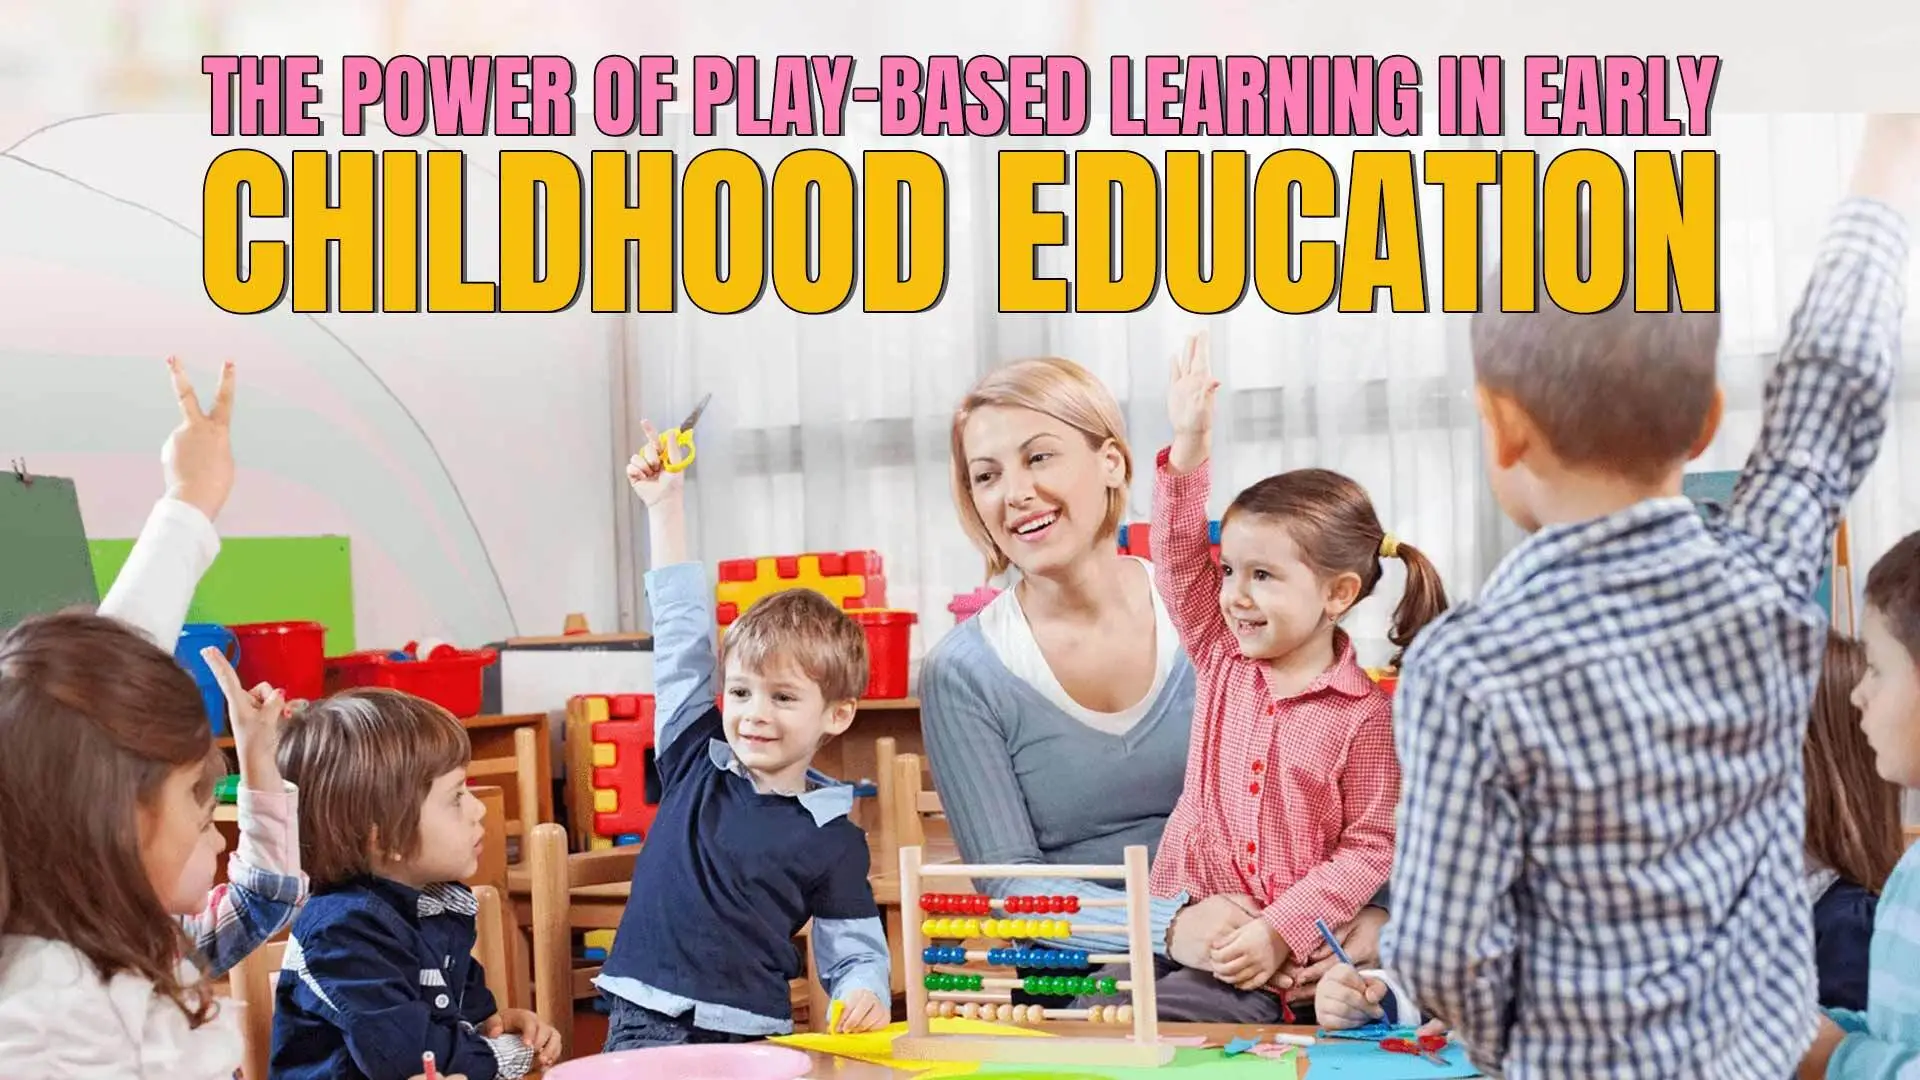 Play-Based Learning